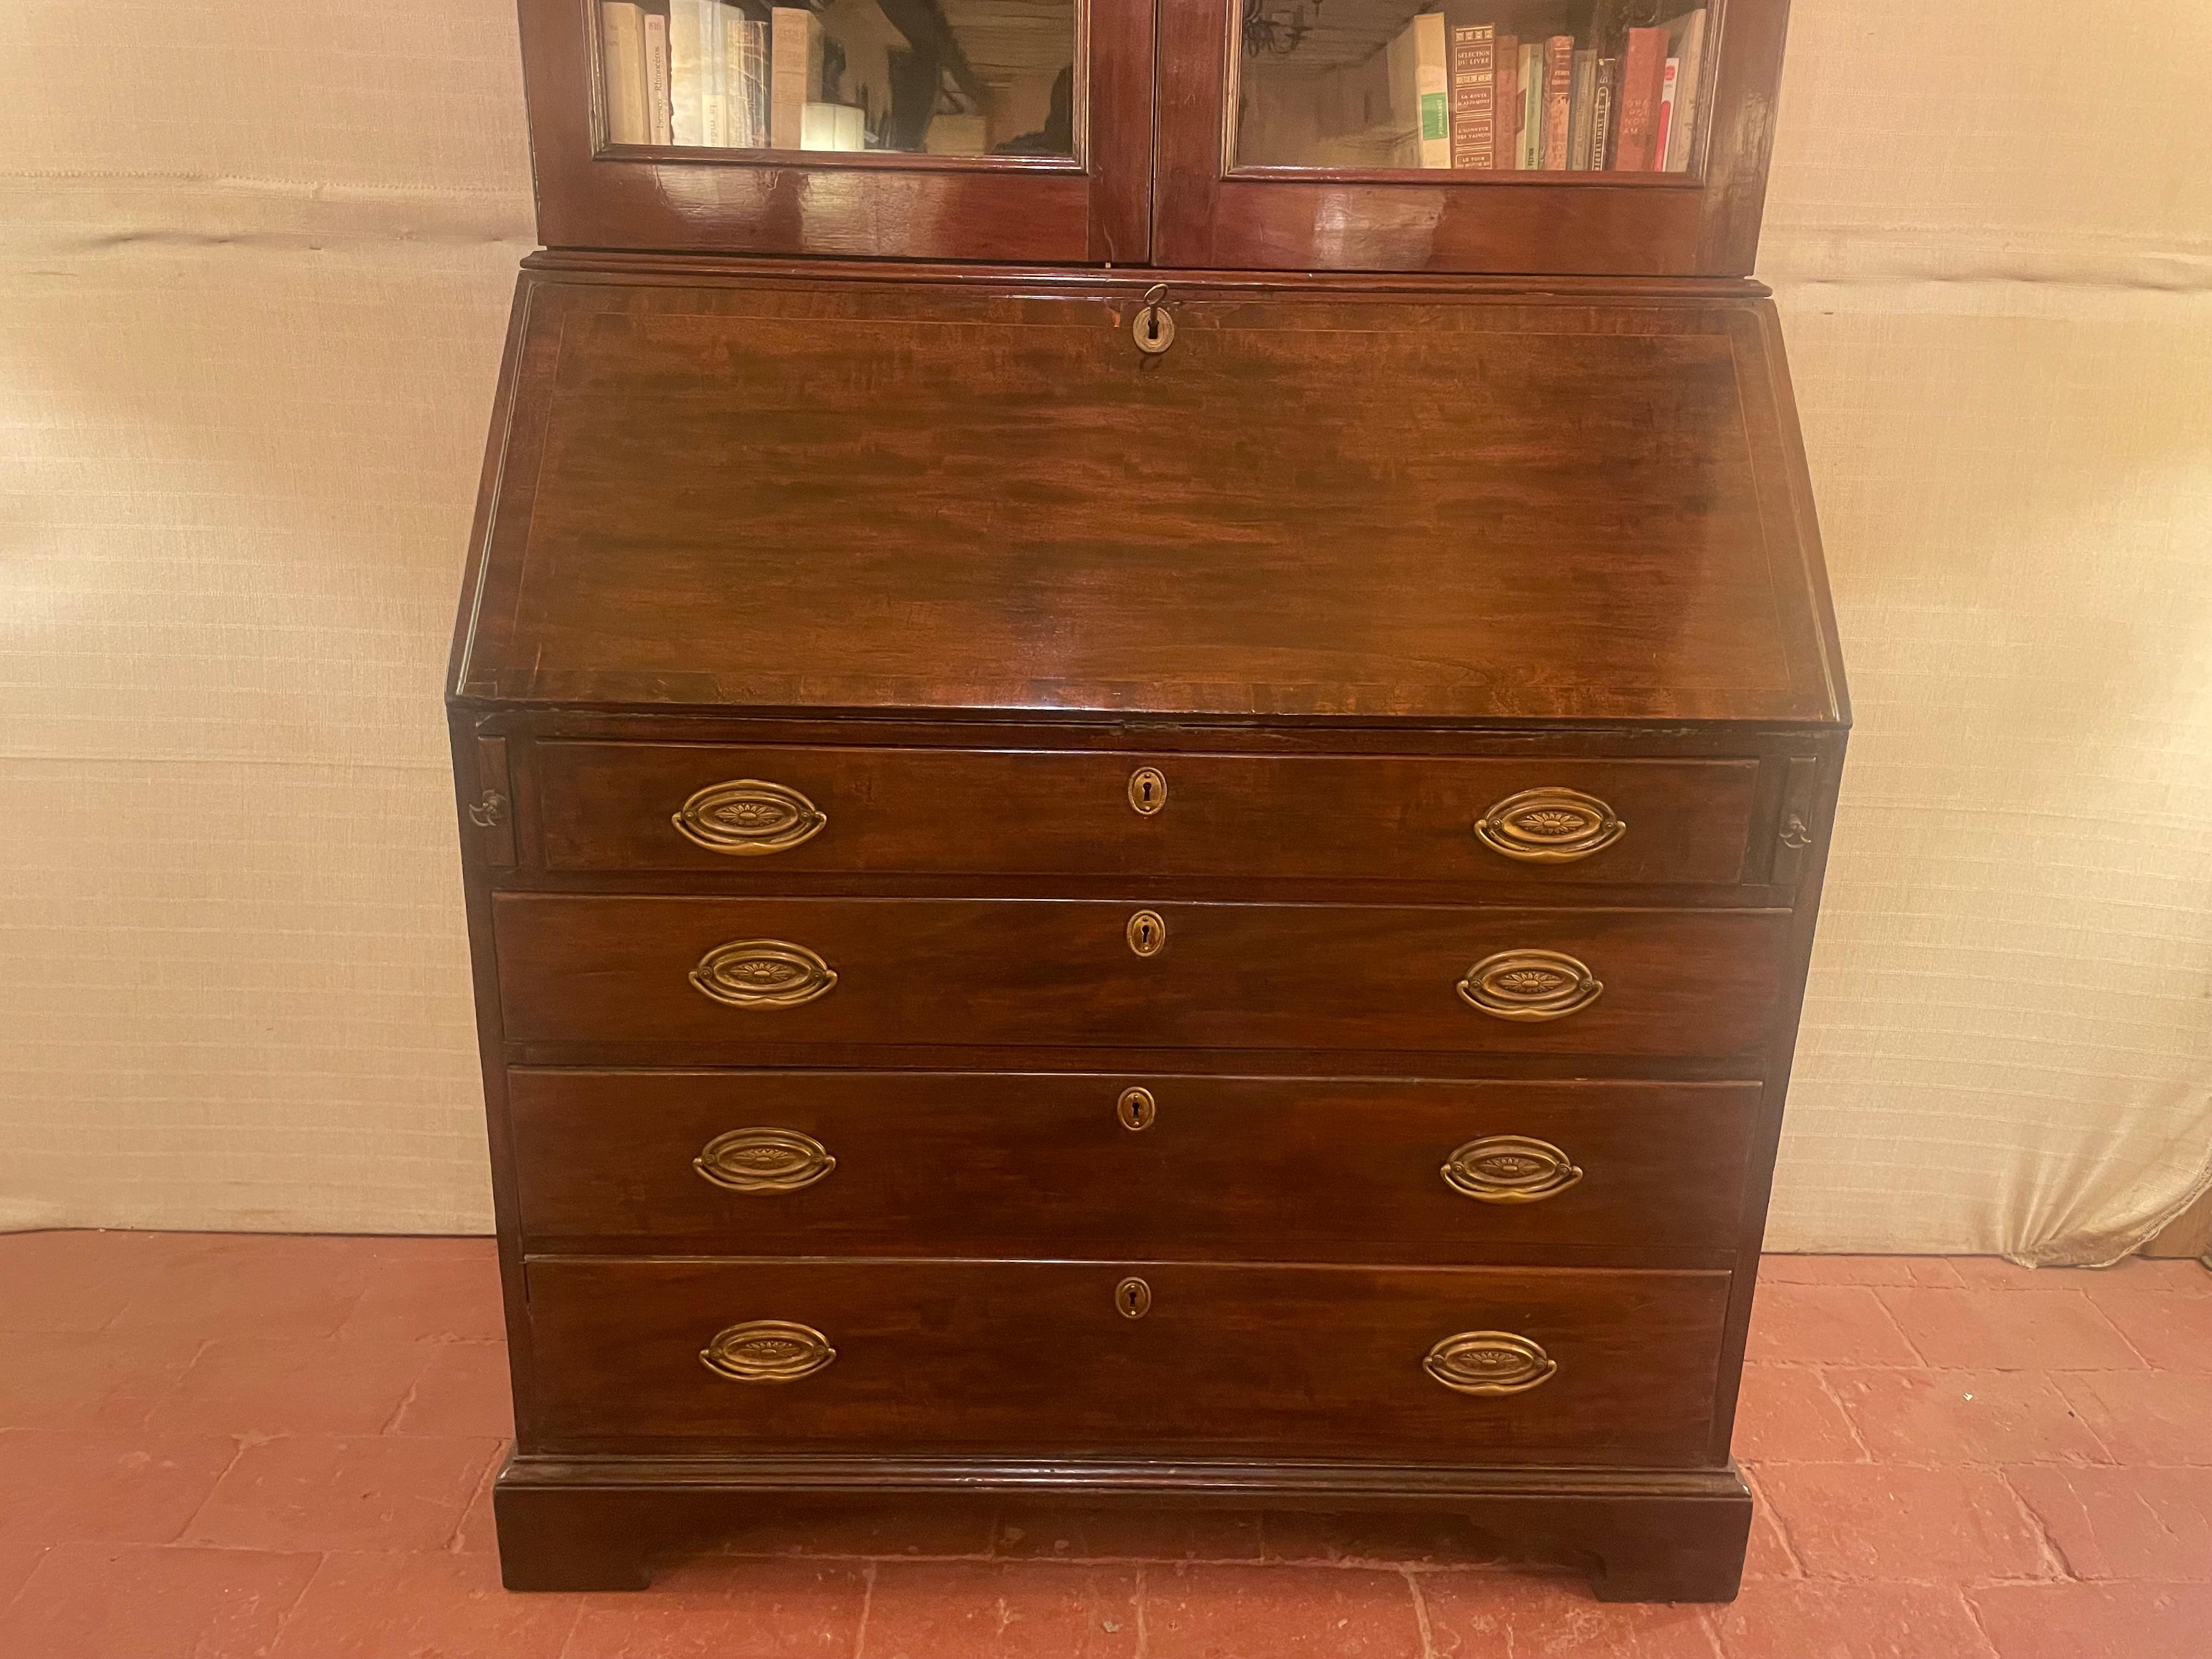 Mahogany glazed secretary from the end of the 18th century of very good quality

Very beautiful secretary composed of 4 drawers as well as a theater in the lower part and an upper glazed part which can be used as a bookcase or display cabinet.

This